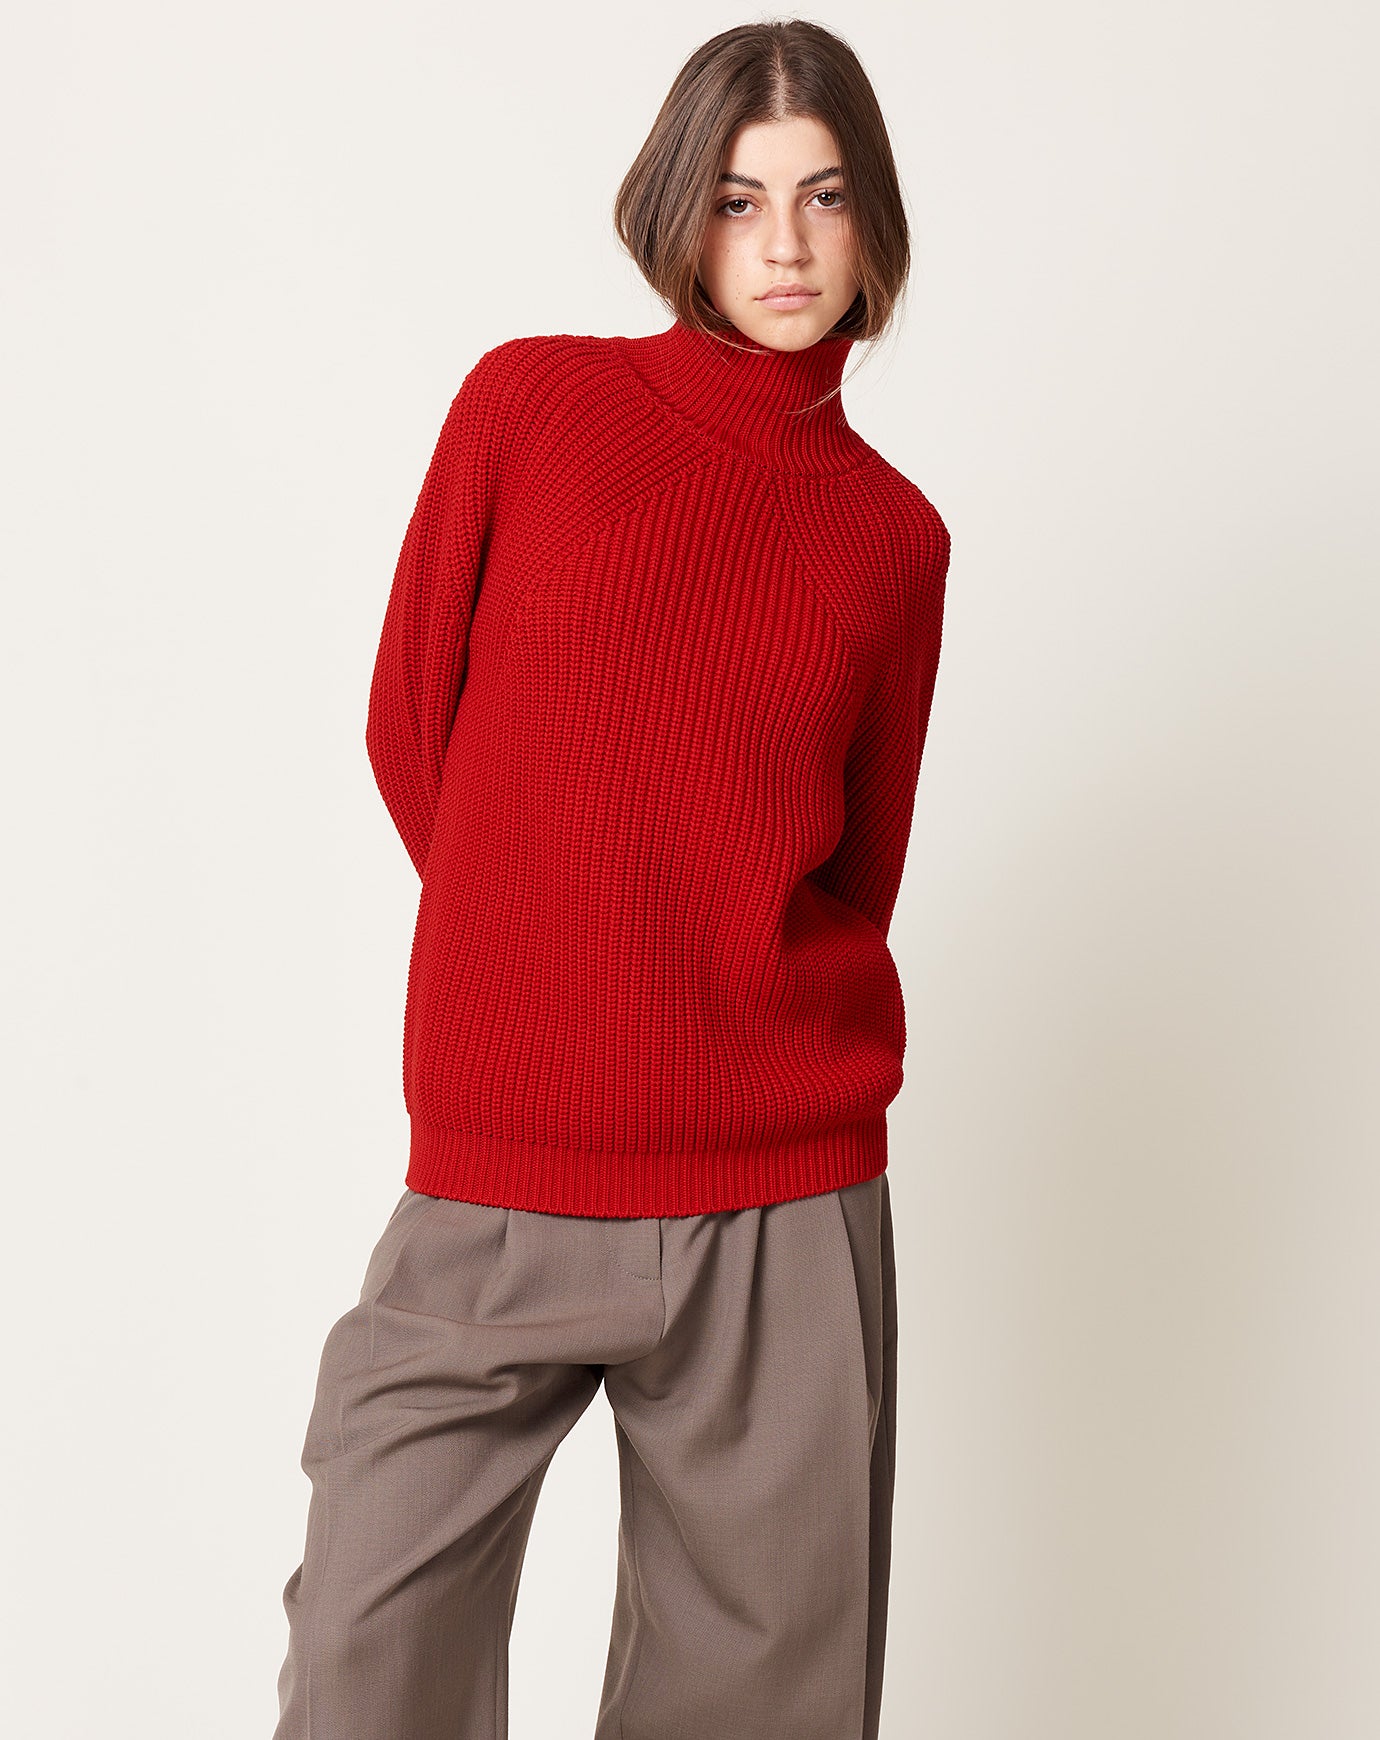 Signature Turtleneck Tunic in Ruby